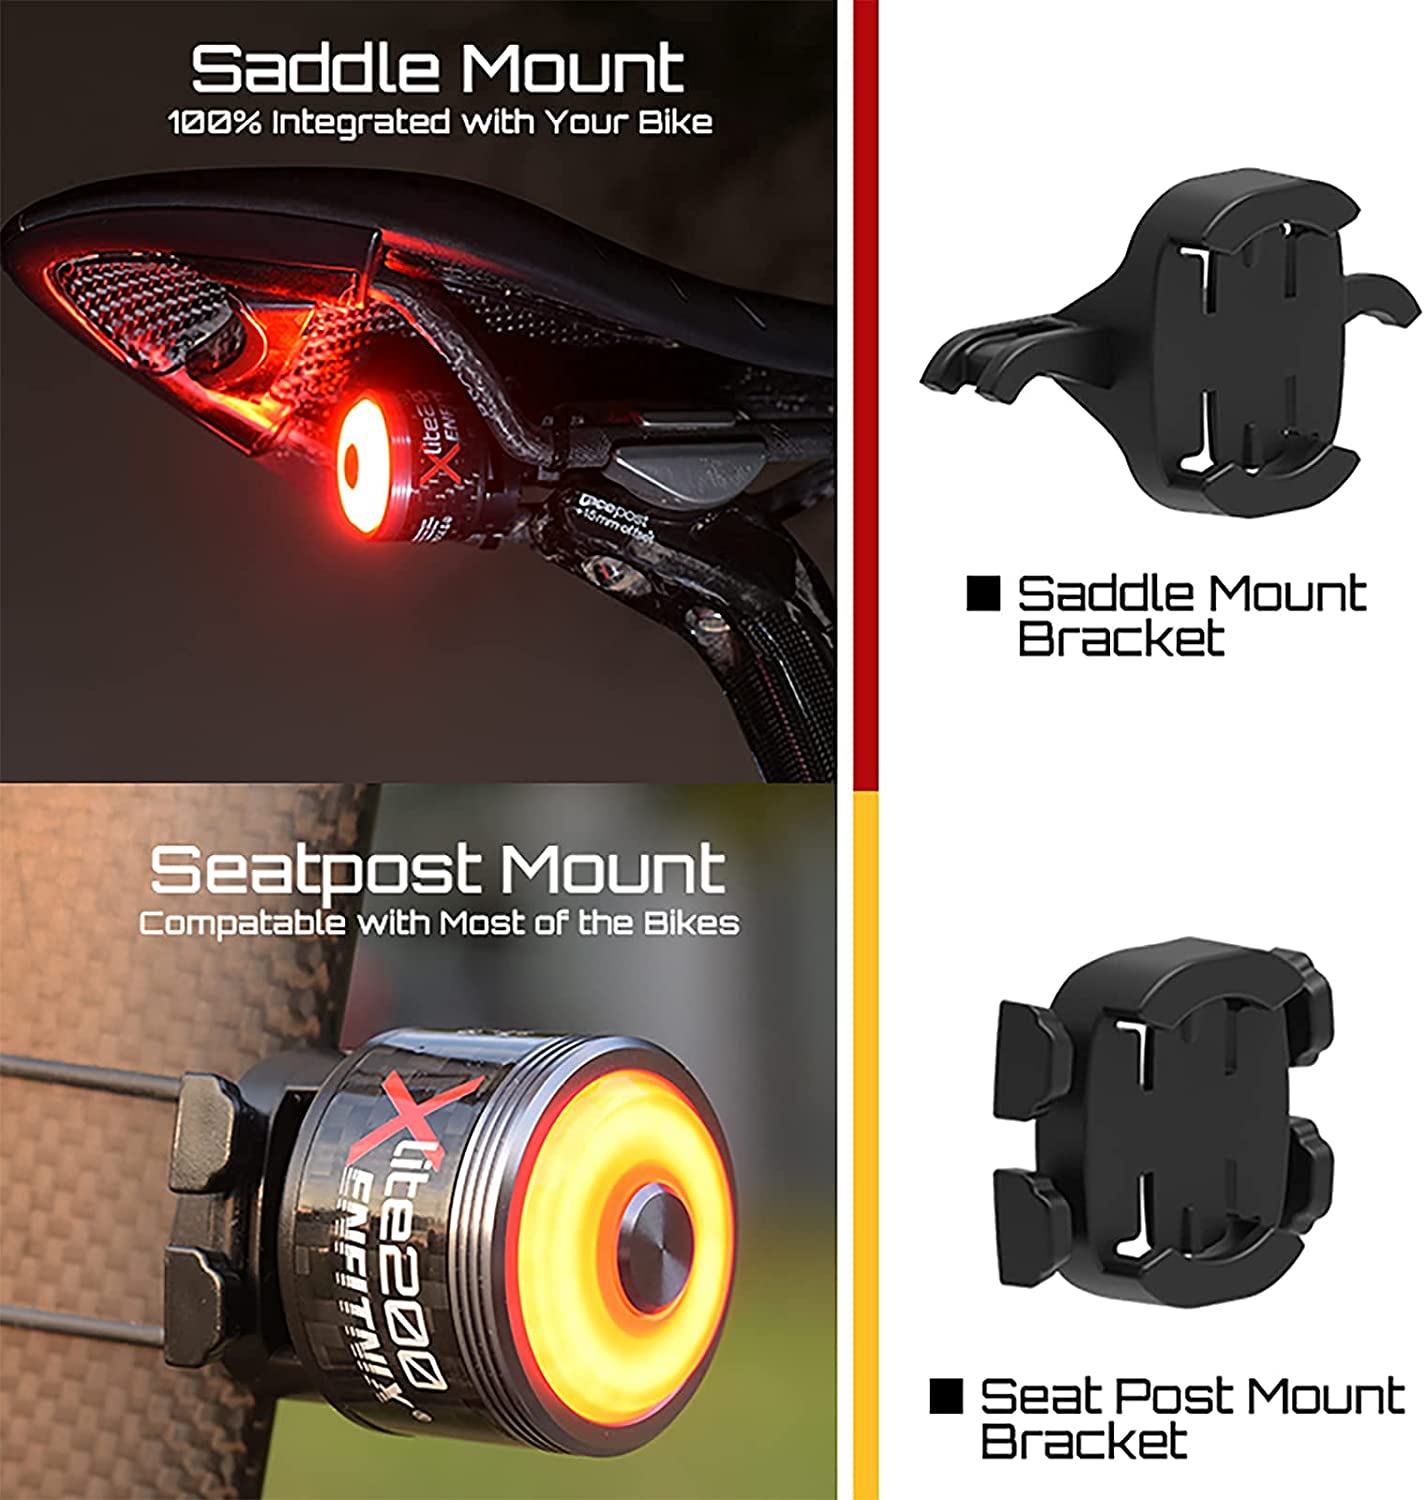 ENFITNIX Xlite200 Smart Bike Tail Light Carbon Fiber Shell Bicycle Rear Light Brake Sensing Automatically Adjust The Brightness USB Rechargeable IPX6 Waterproof for Cycling Safety Fit All Road Bikes - XOSS.CO